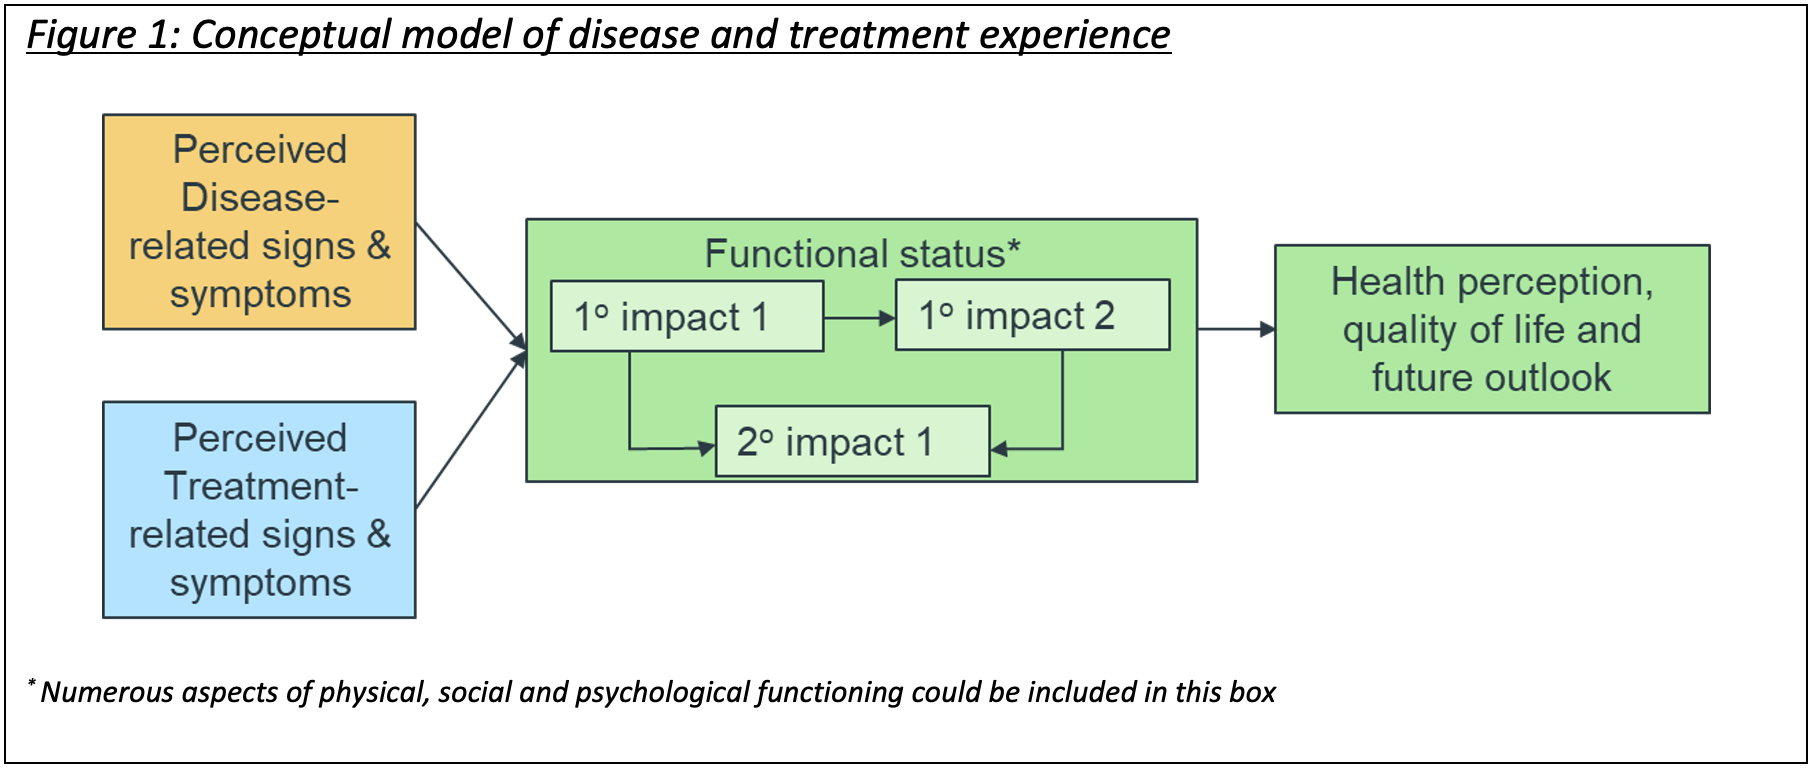 Figure 1: Conceptual model of disease and treatment experience